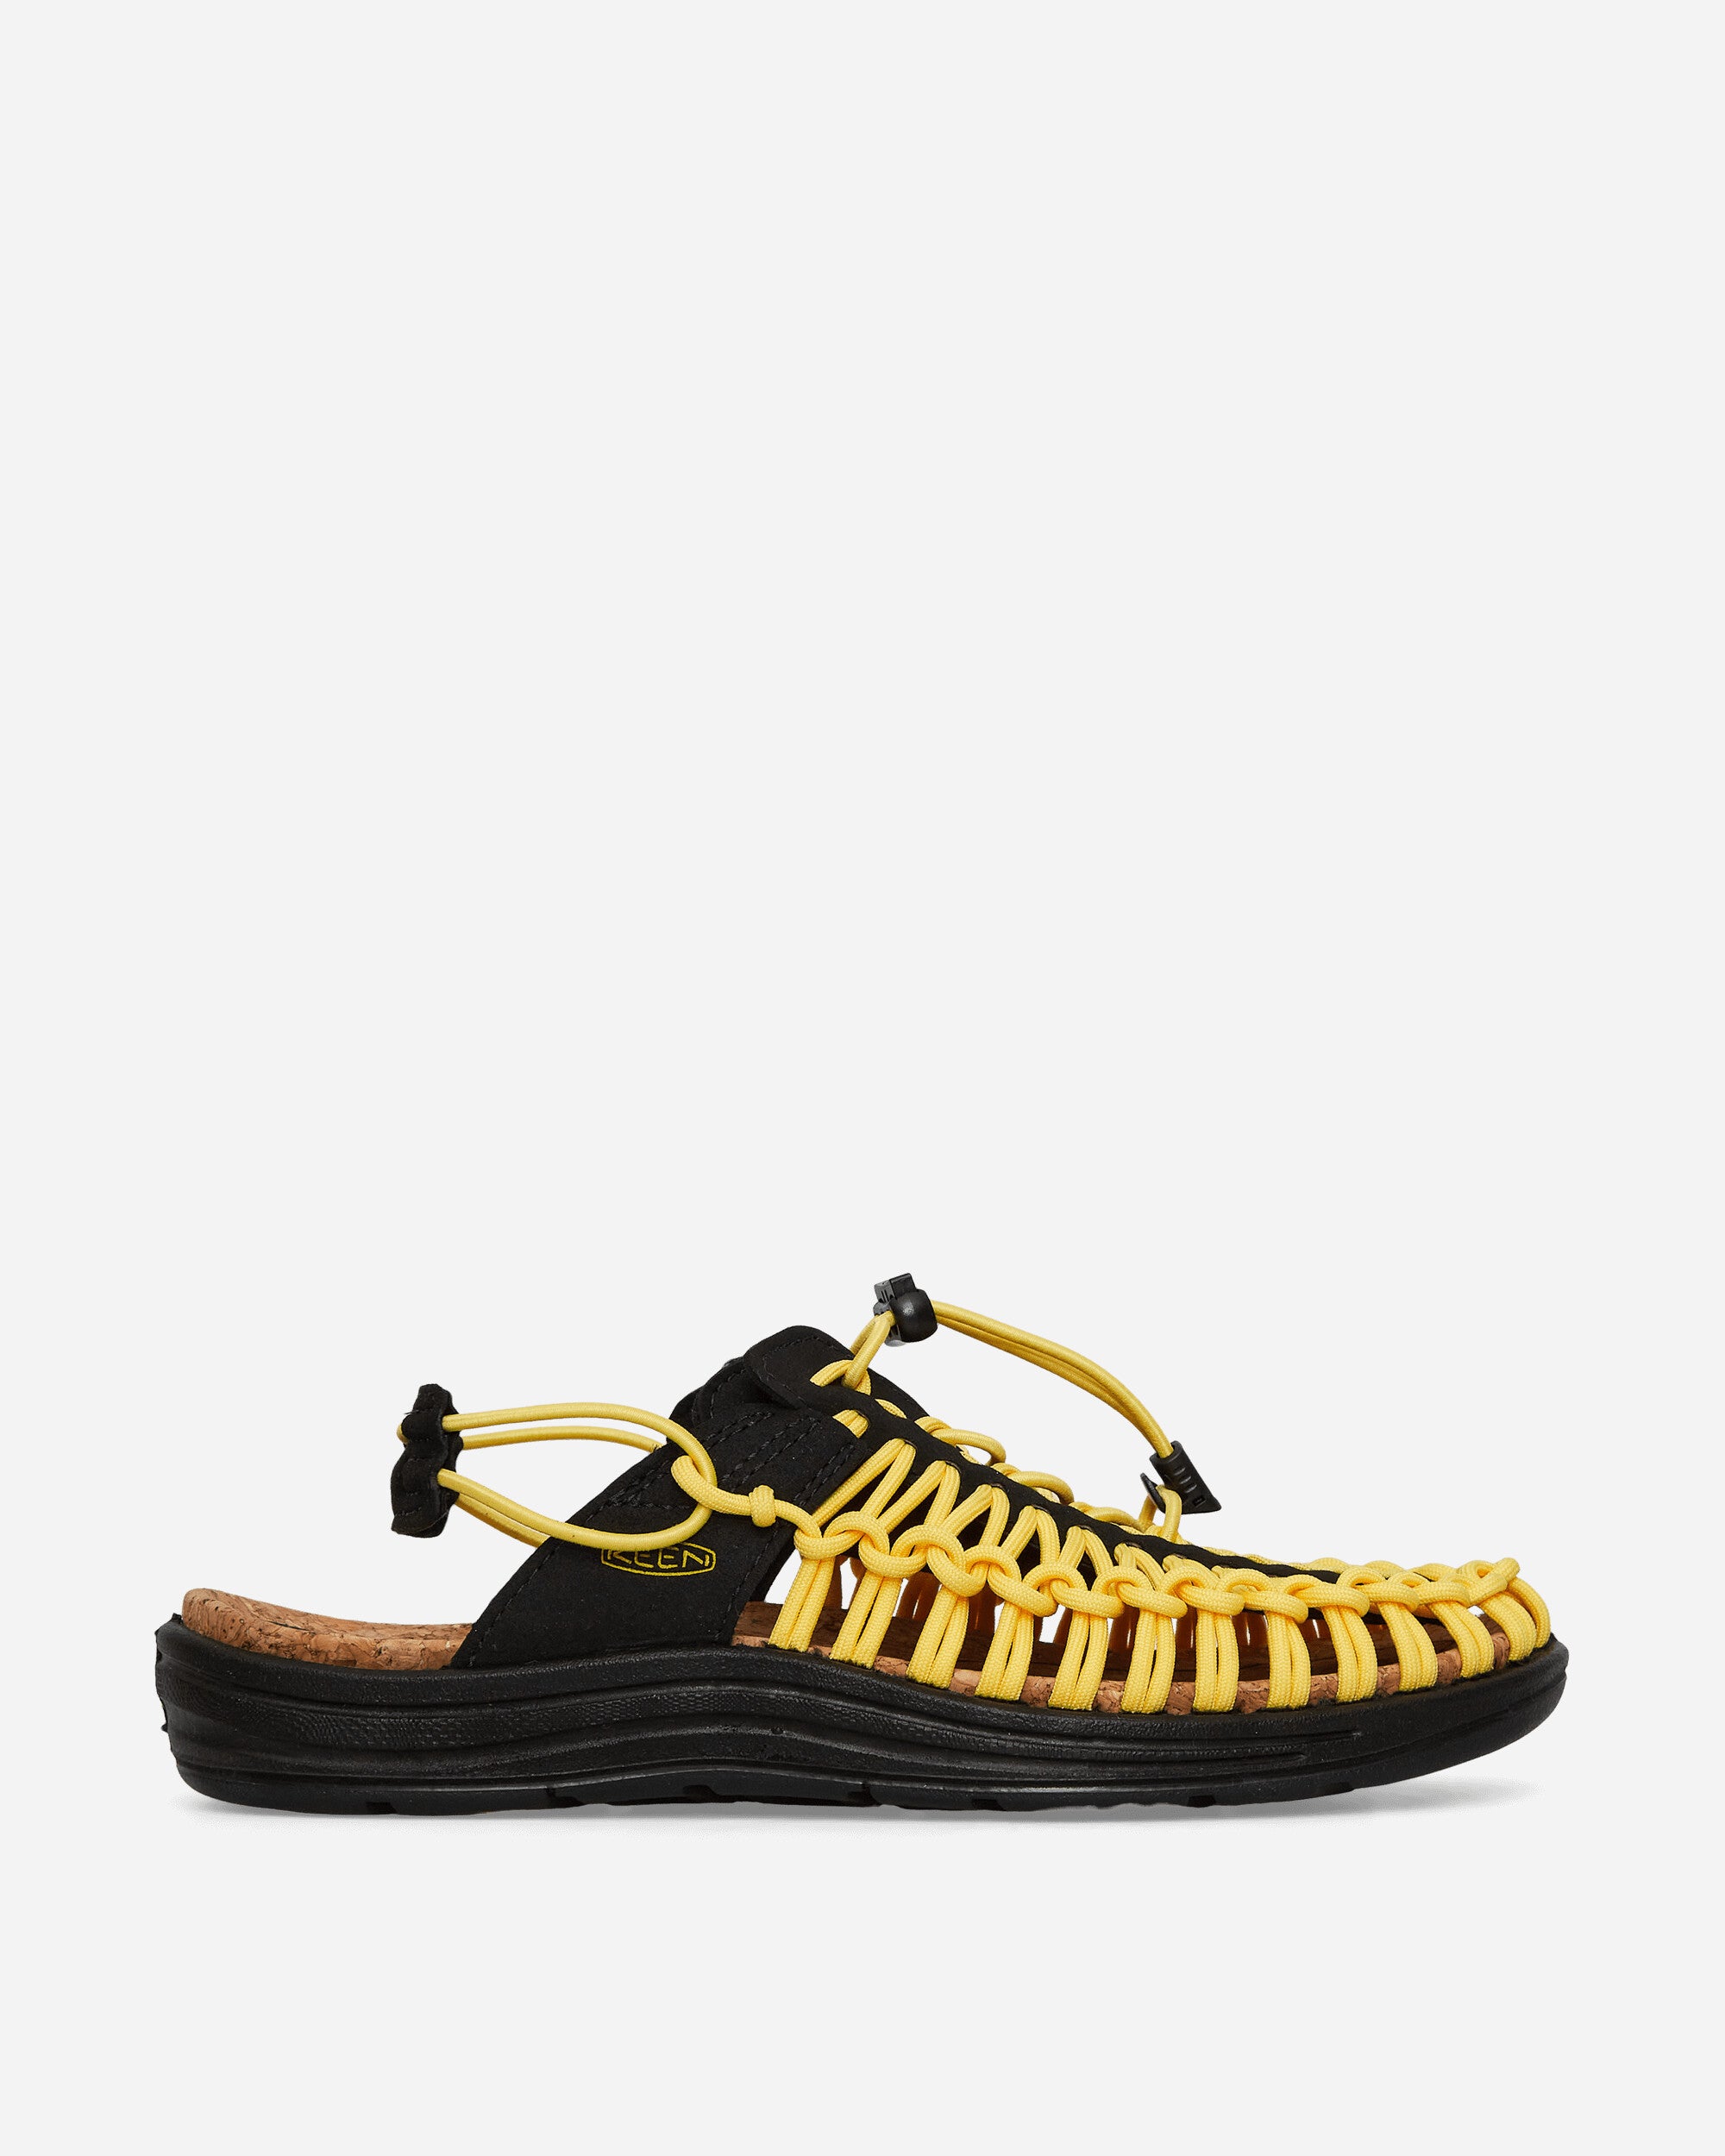 Keen Uneek Ii Black/Keen Yellow Sandals and Slides Sandals and Mules 1028665 001